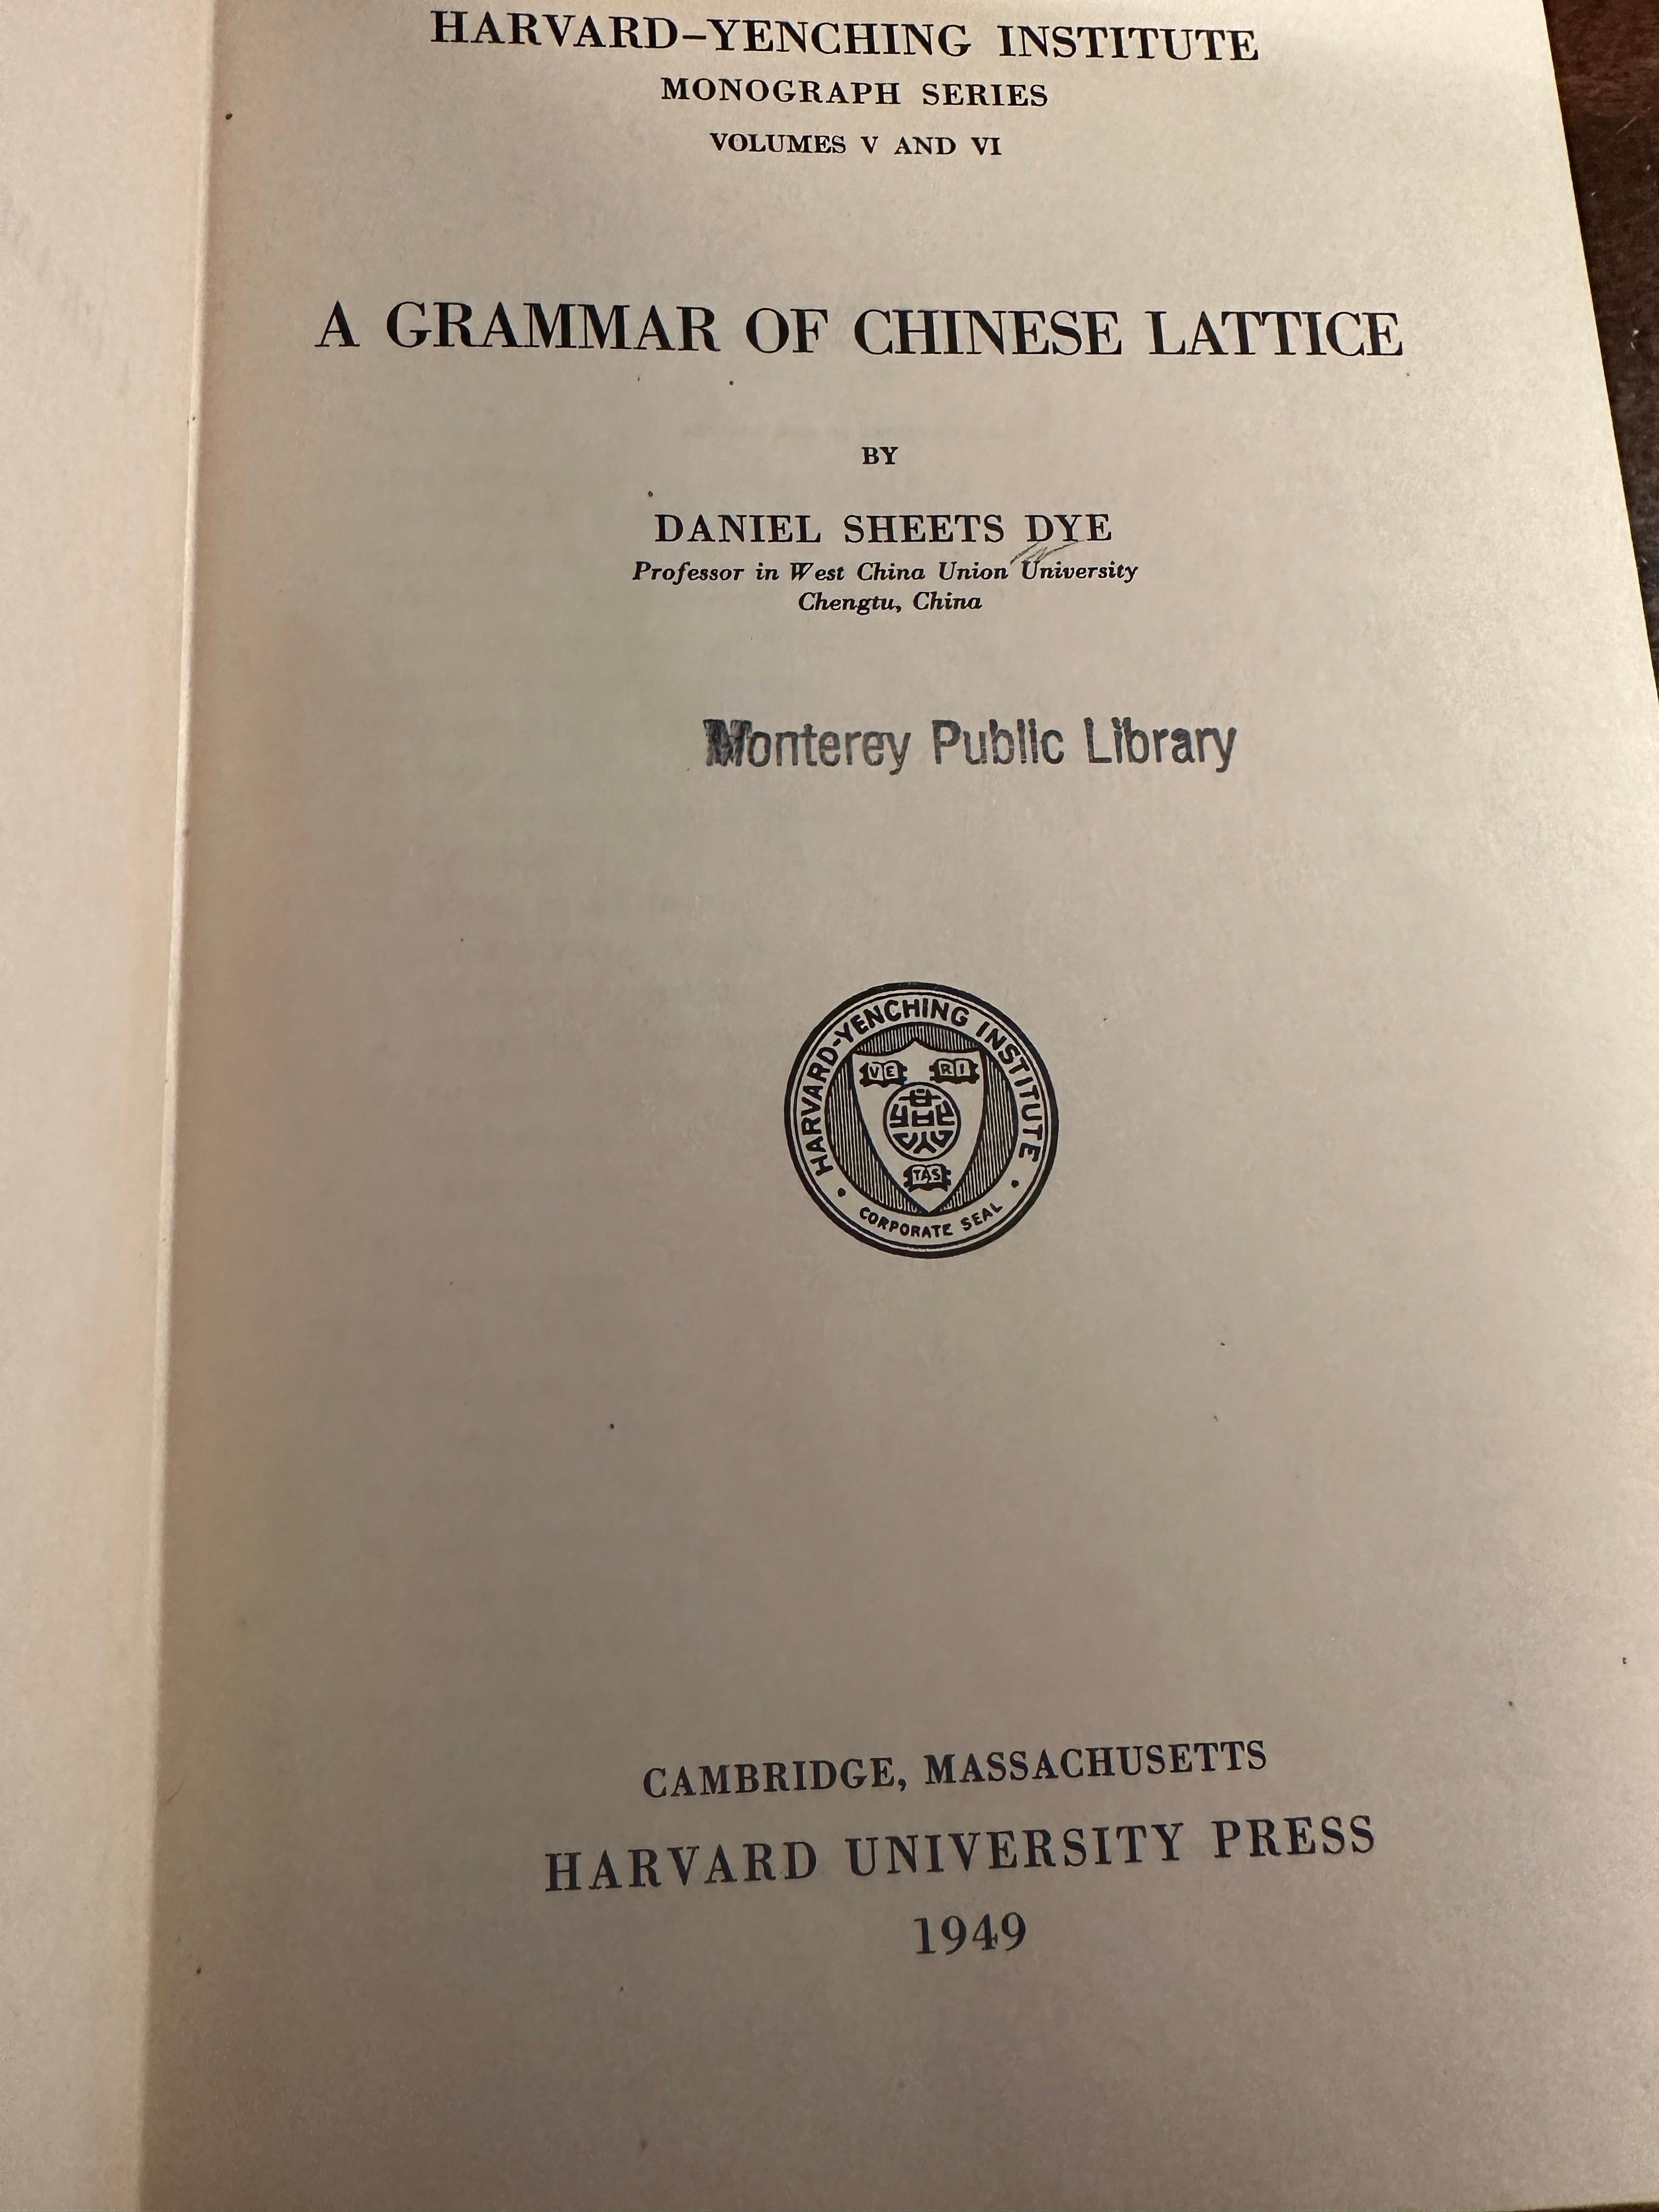 American Gramar of Chinese Lattice by Daniel Sheets Dye, Harvard-Yenching Institute For Sale